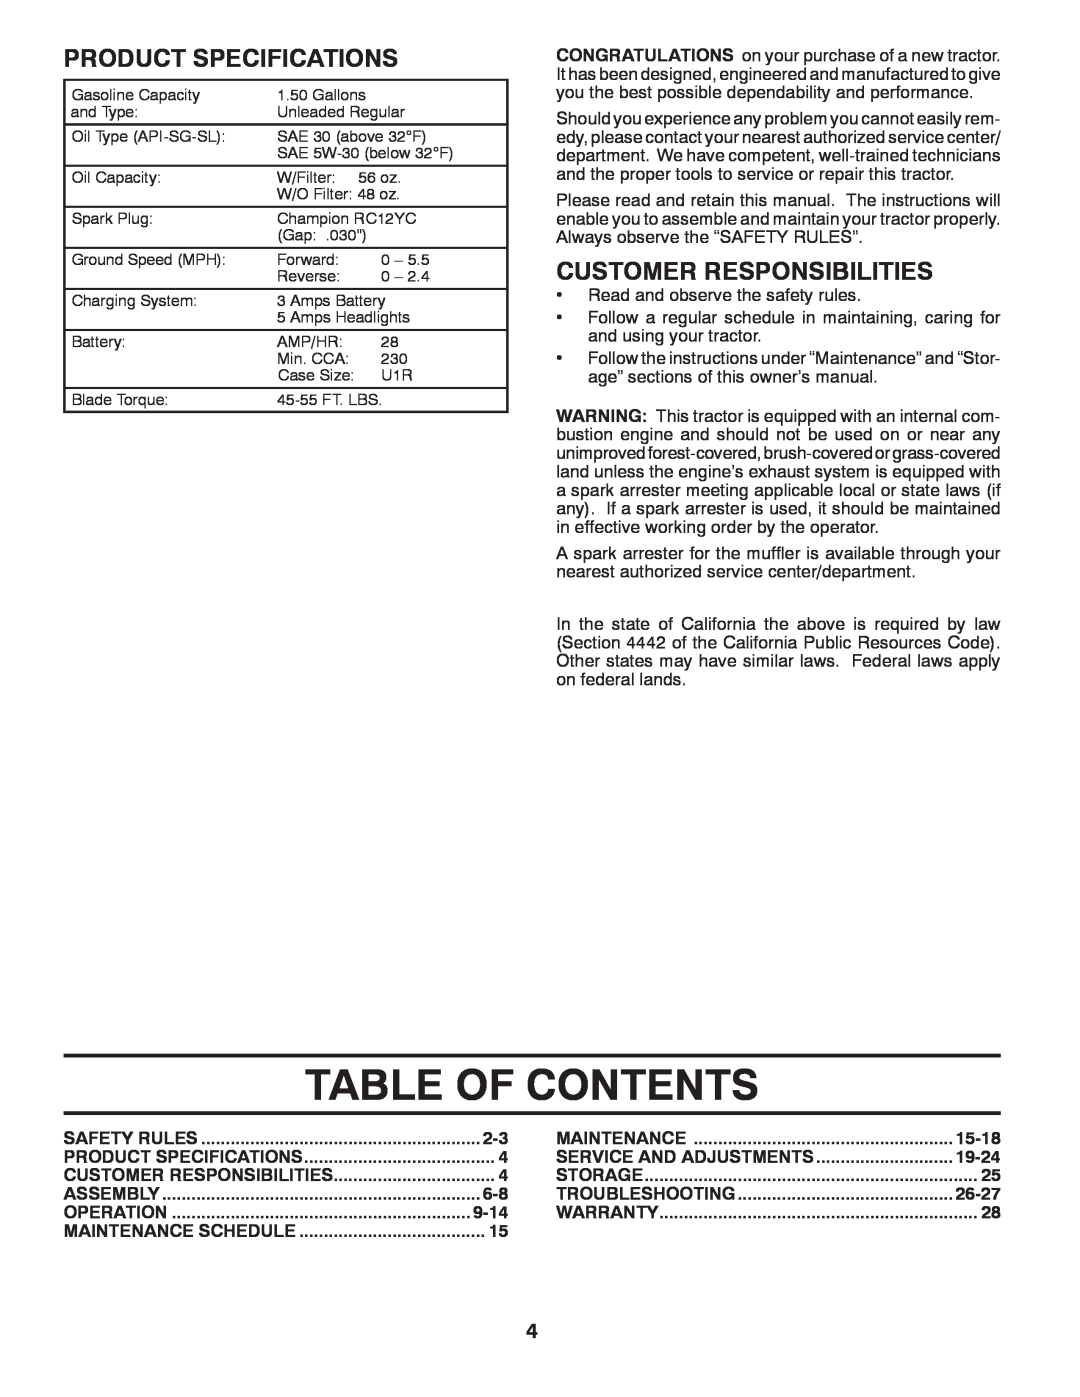 Poulan 96042004700, 418769 manual Table Of Contents, Product Specifications, Customer Responsibilities 